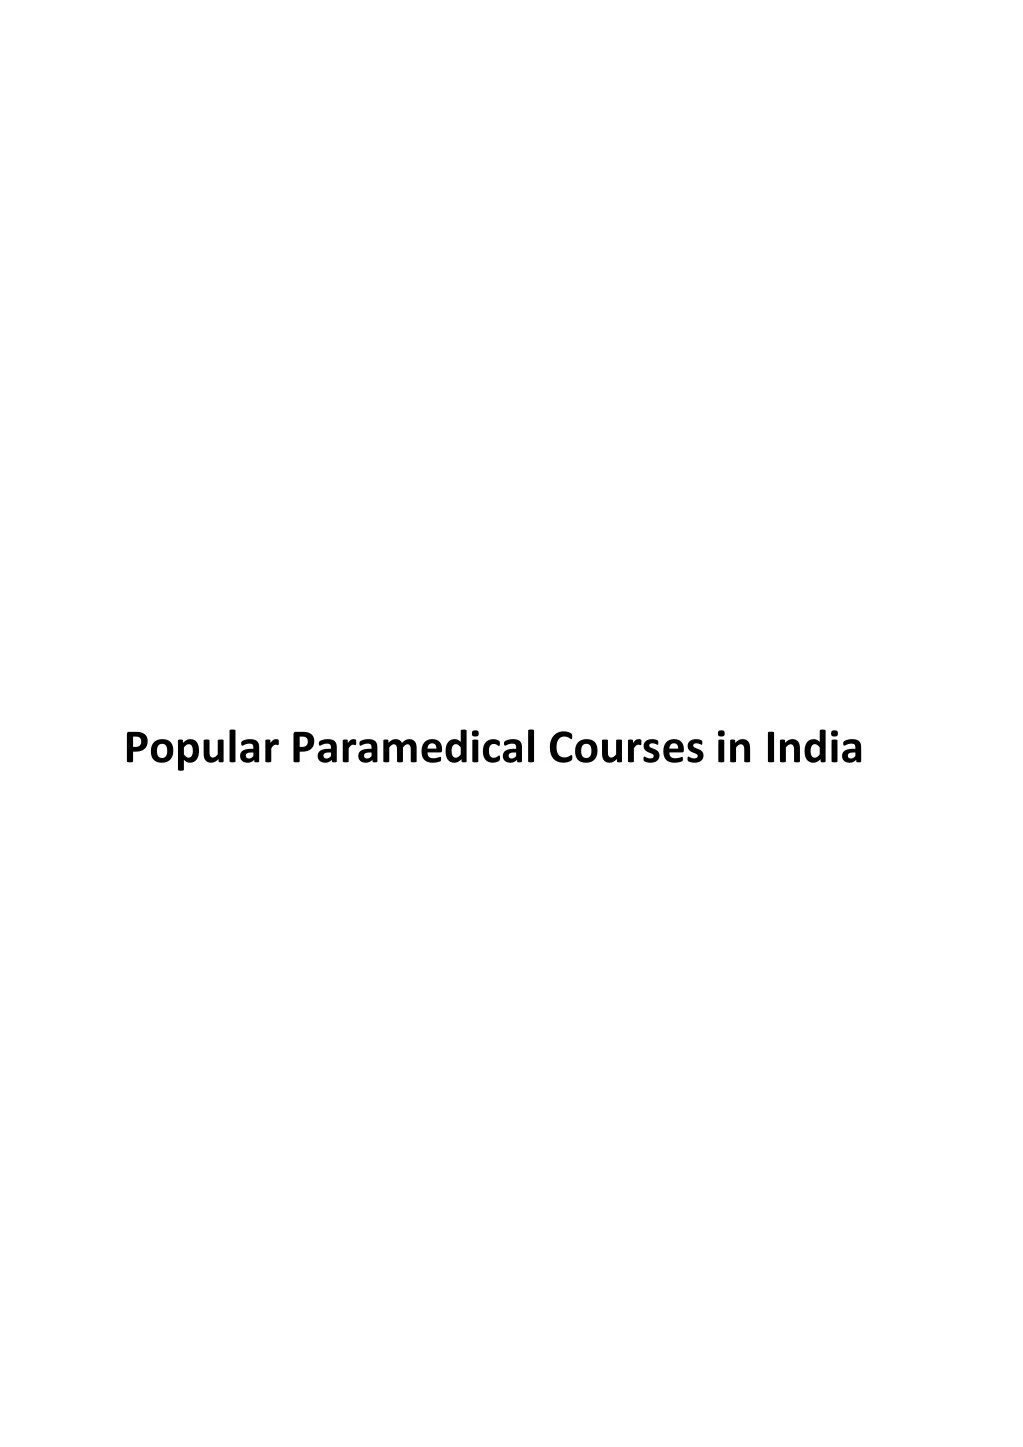 popular paramedical courses in india